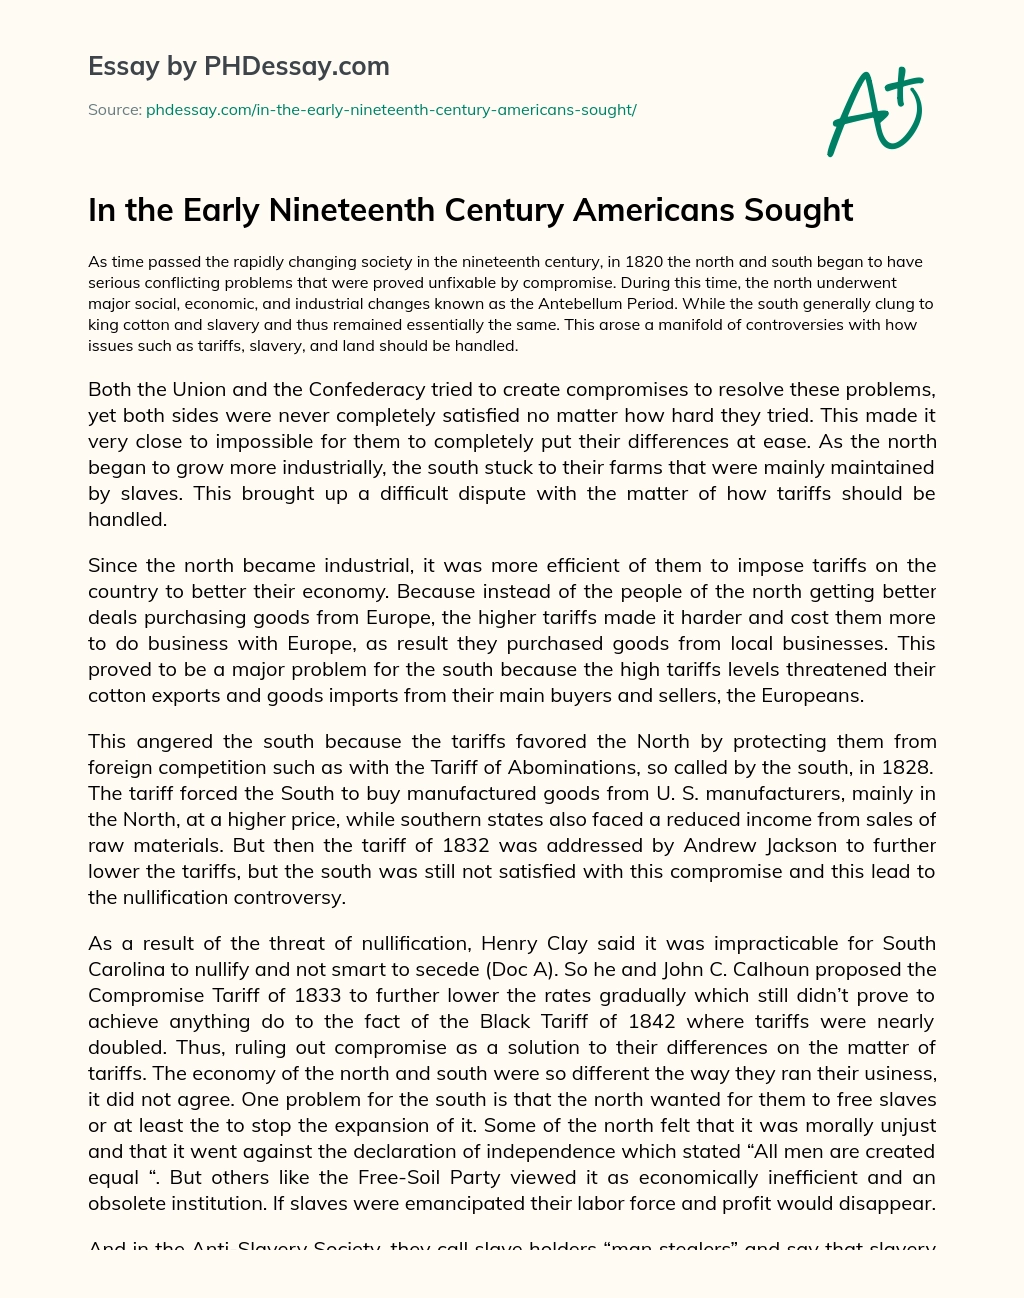 In the Early Nineteenth Century Americans Sought essay